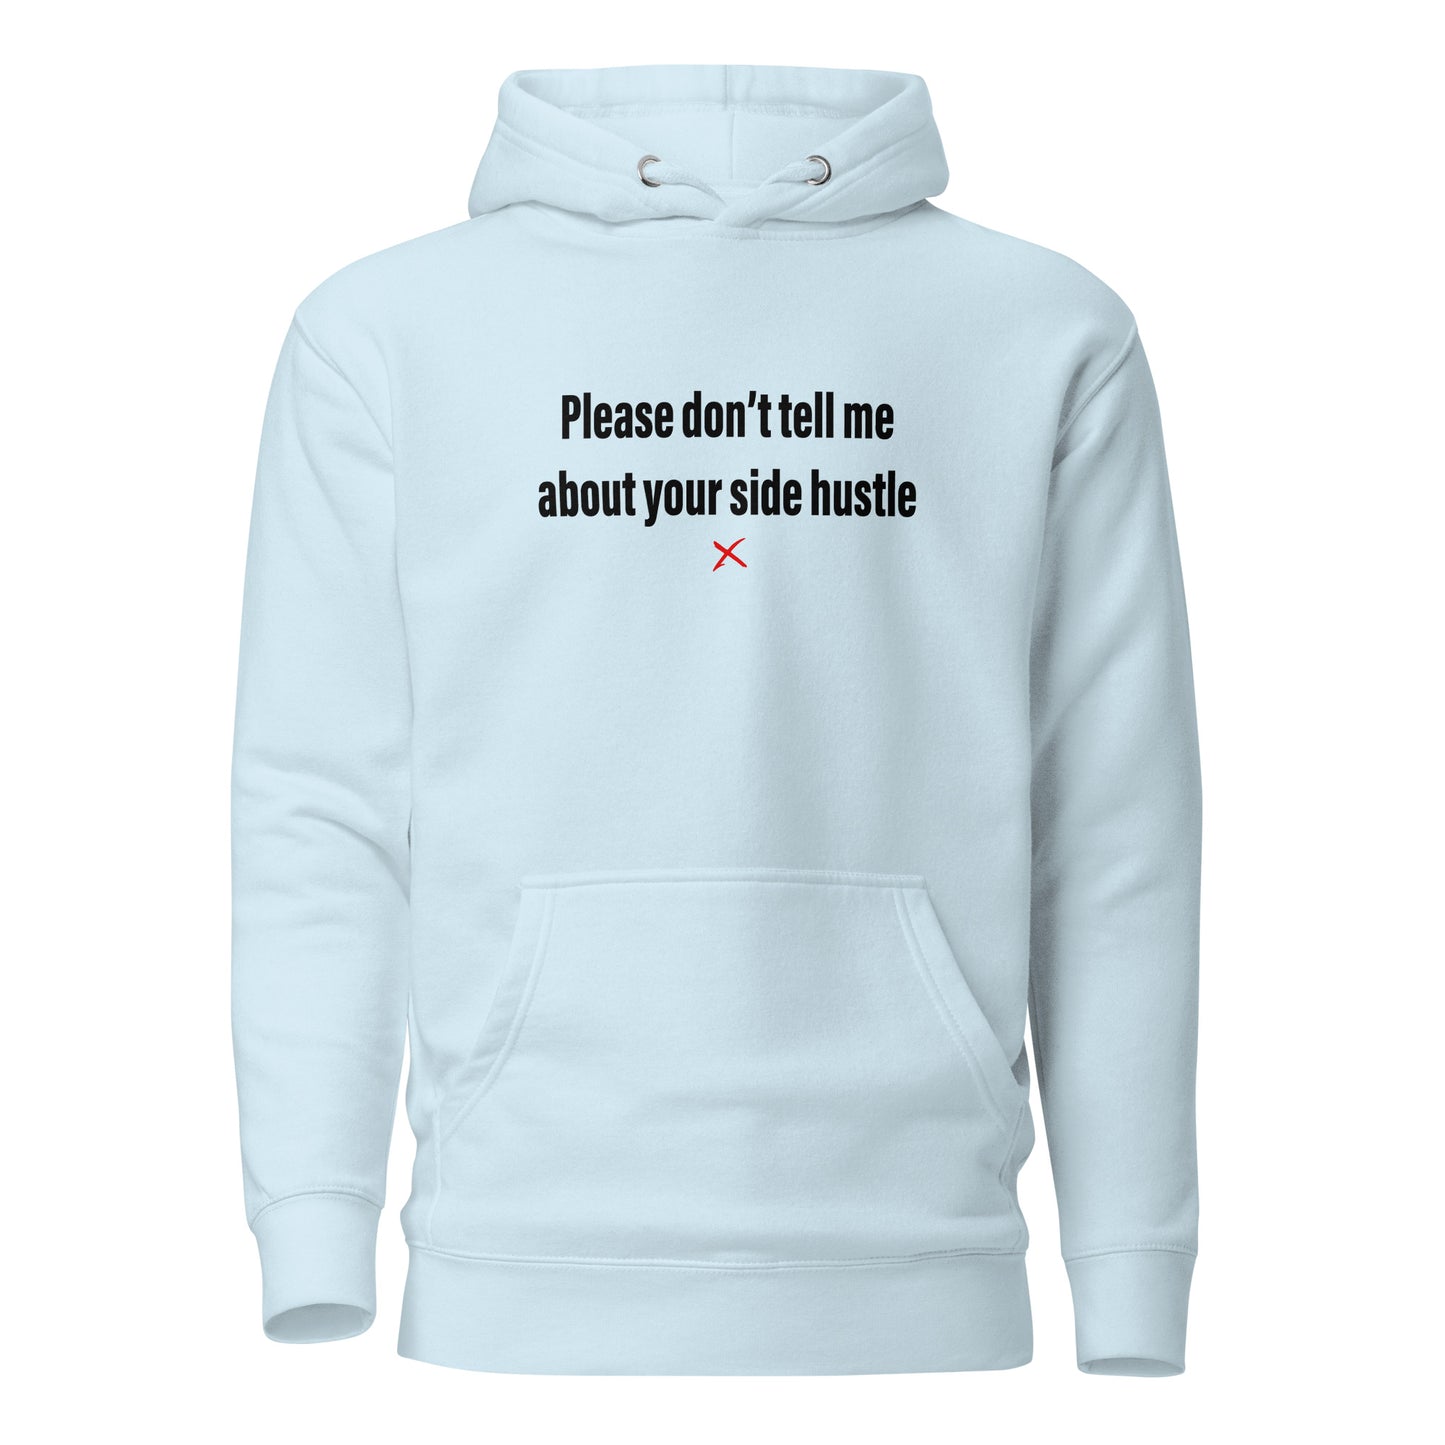 Please don't tell me about your side hustle - Hoodie